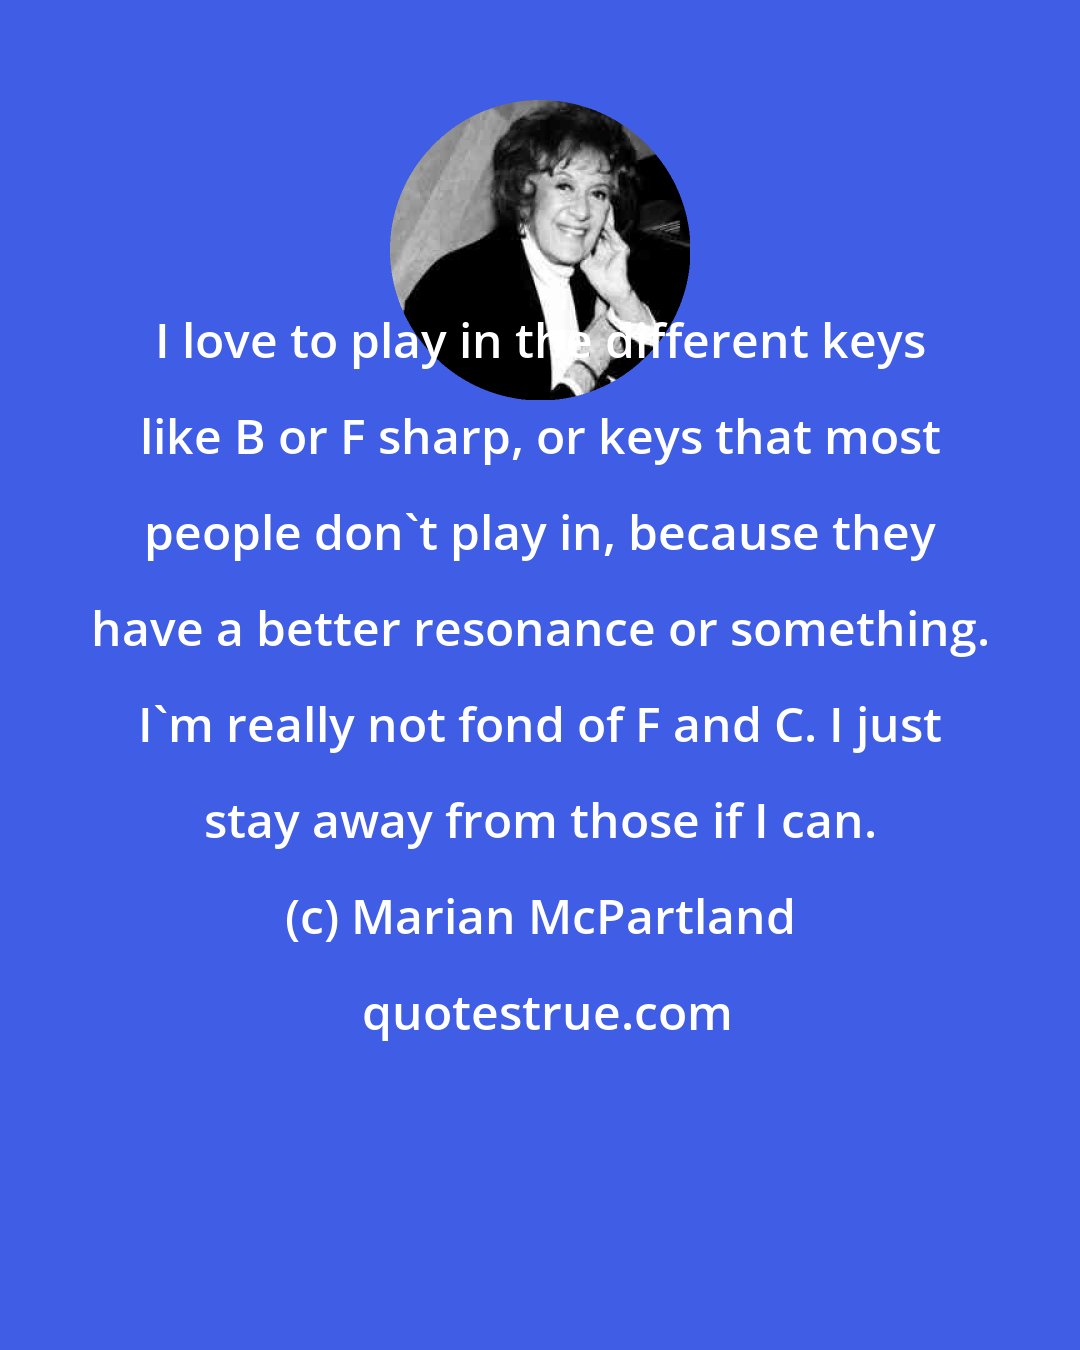 Marian McPartland: I love to play in the different keys like B or F sharp, or keys that most people don't play in, because they have a better resonance or something. I'm really not fond of F and C. I just stay away from those if I can.